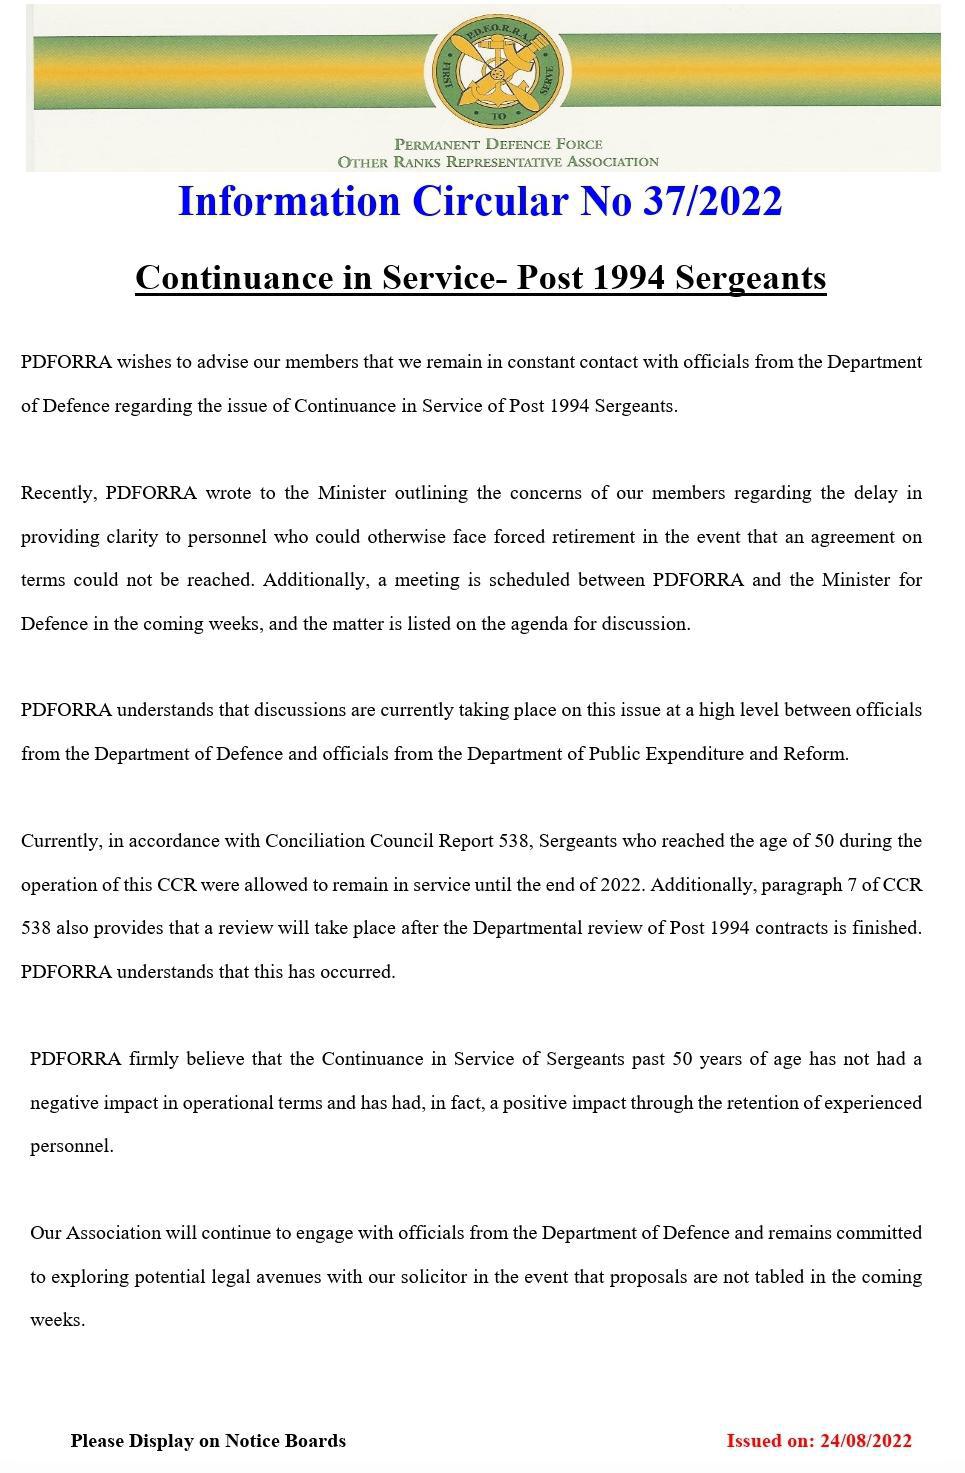 Information Circular No 37 of 22 - Continuance In Service Post 1994 Sgt's